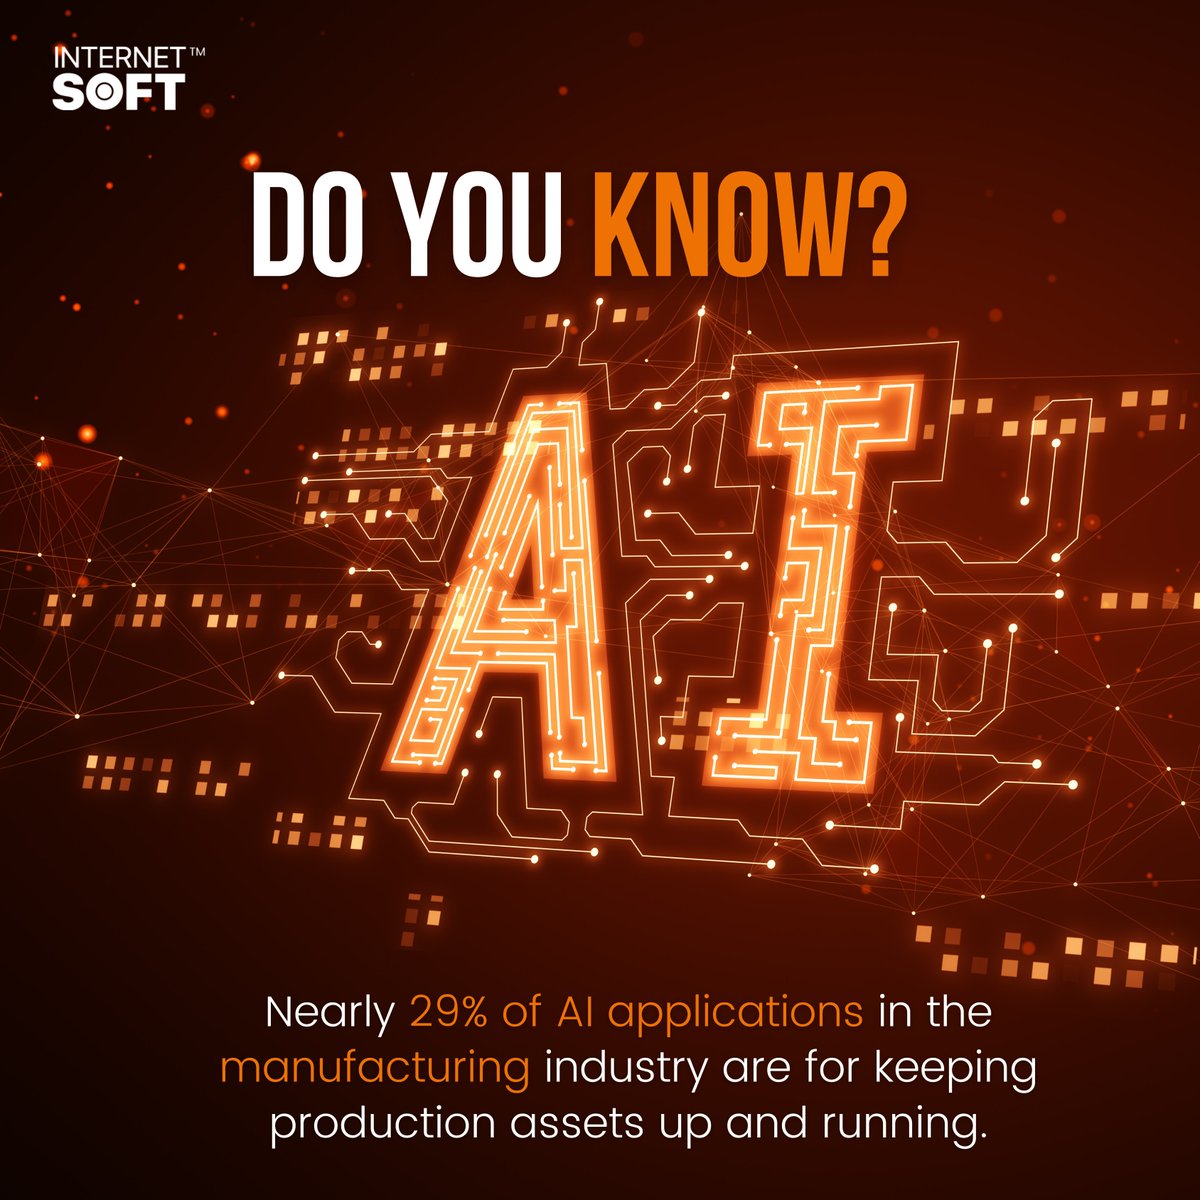 Do You Know?

#doyouknow #techtrends2024 #techtrends #ai #aiinbusiness #aichallenges #artificialintelligence #manufacturingindustry #internetsoft